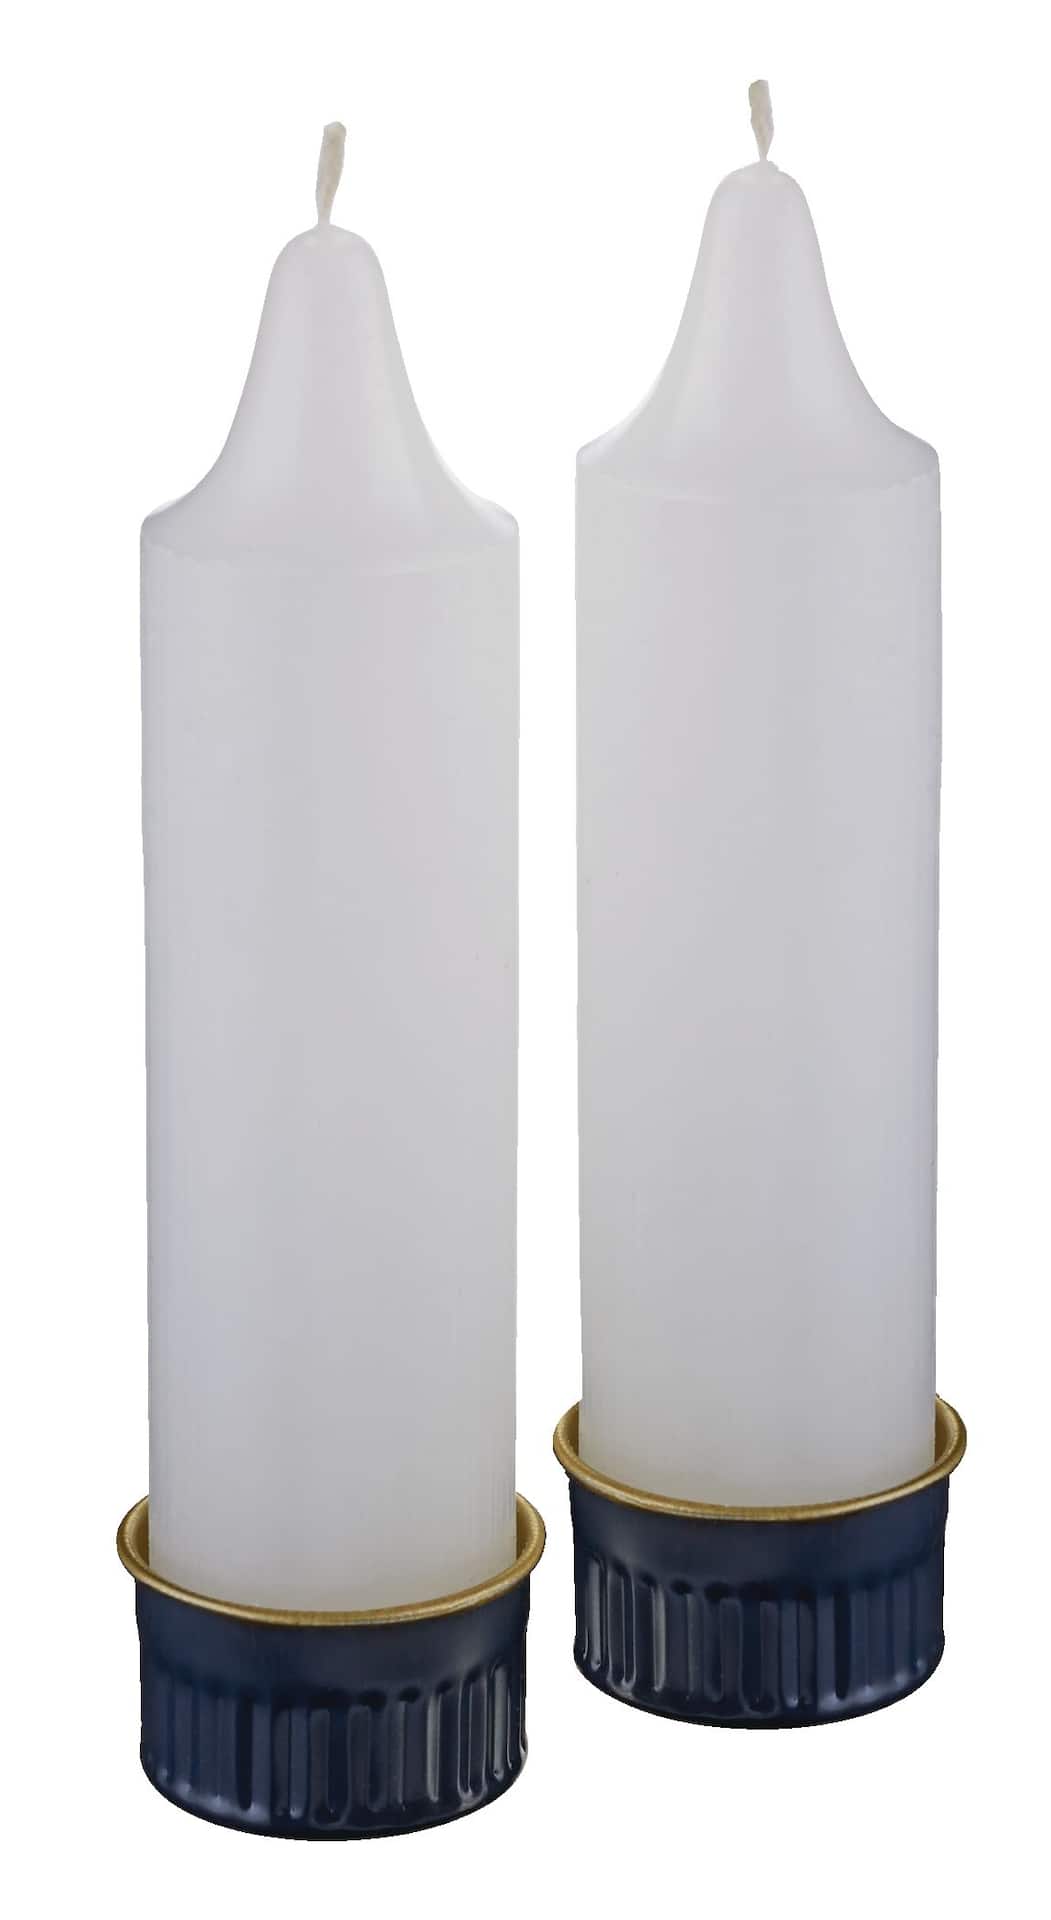 https://media-www.canadiantire.ca/product/playing/camping/camping-accessories/0765751/outbound-candles-emerg-4069062a-4813-4041-a172-d2ef94f93a7b-jpgrendition.jpg